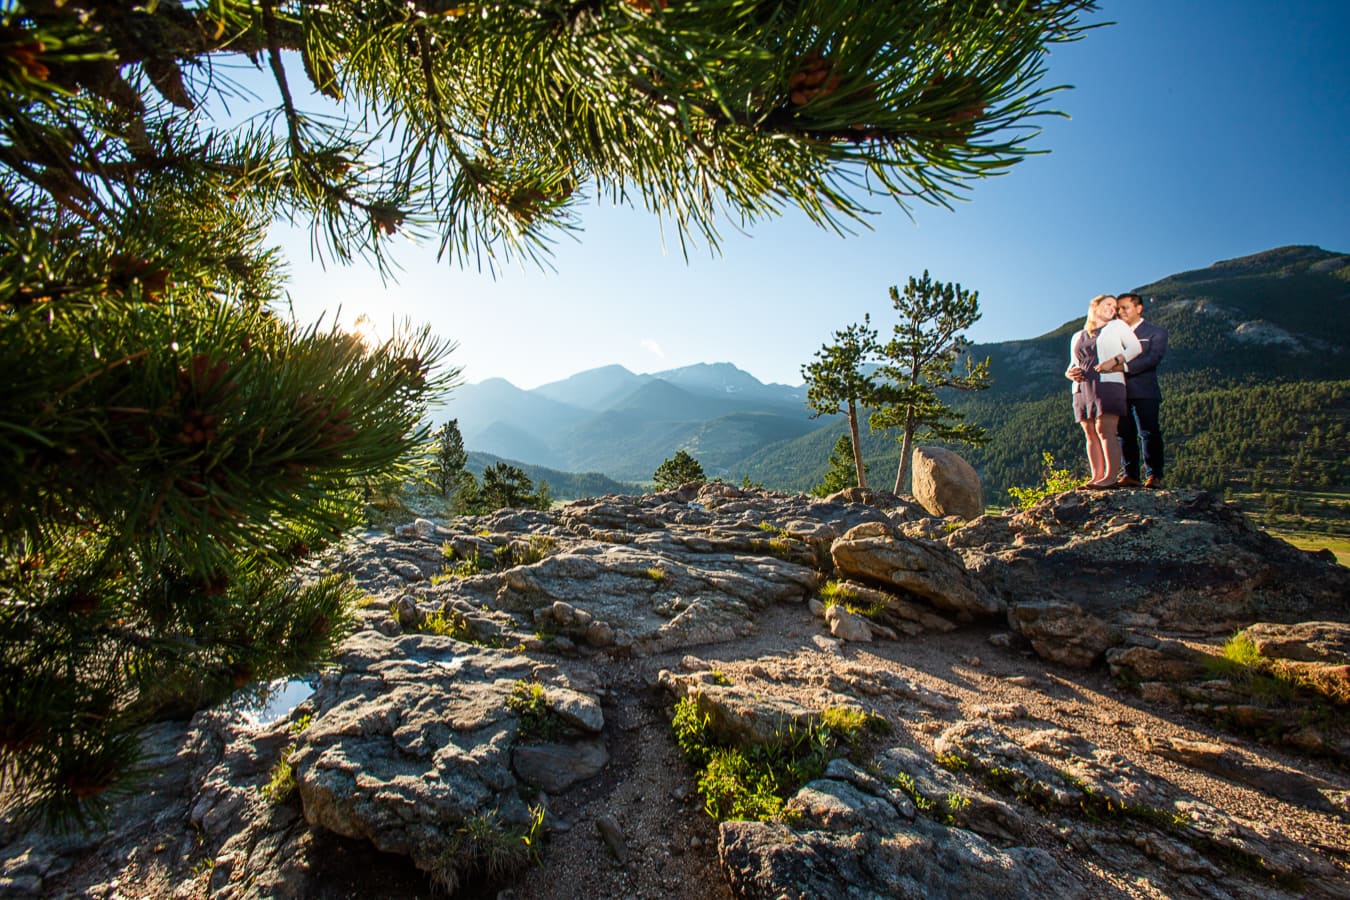 A summer engagement photo at west horseshoe park in rocky mountain national park.